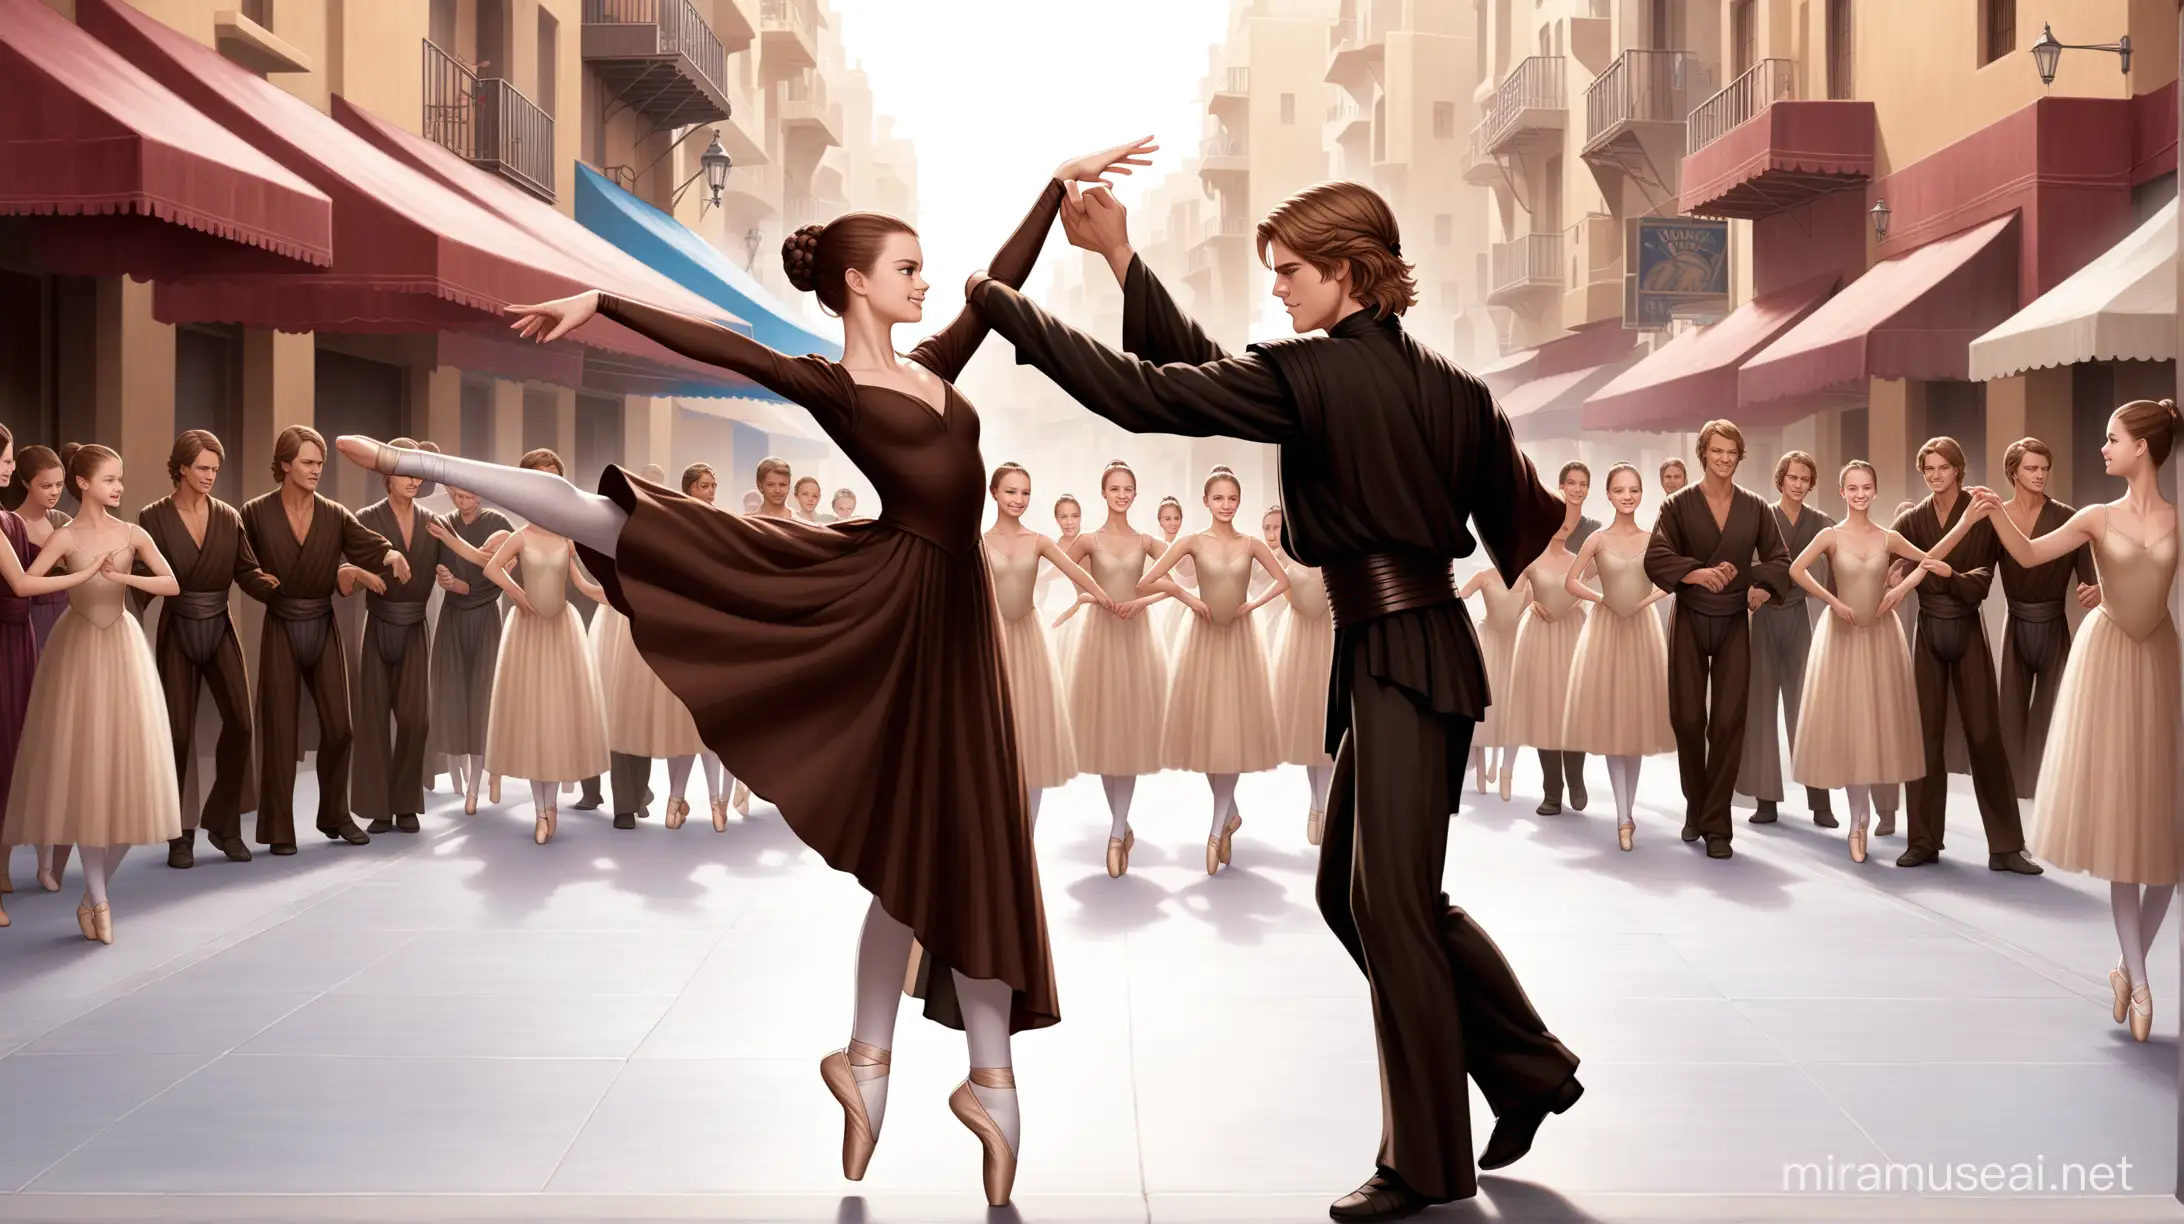 Father and Daughter Street Dance with Anakin Skywalker and Ballet Dancers